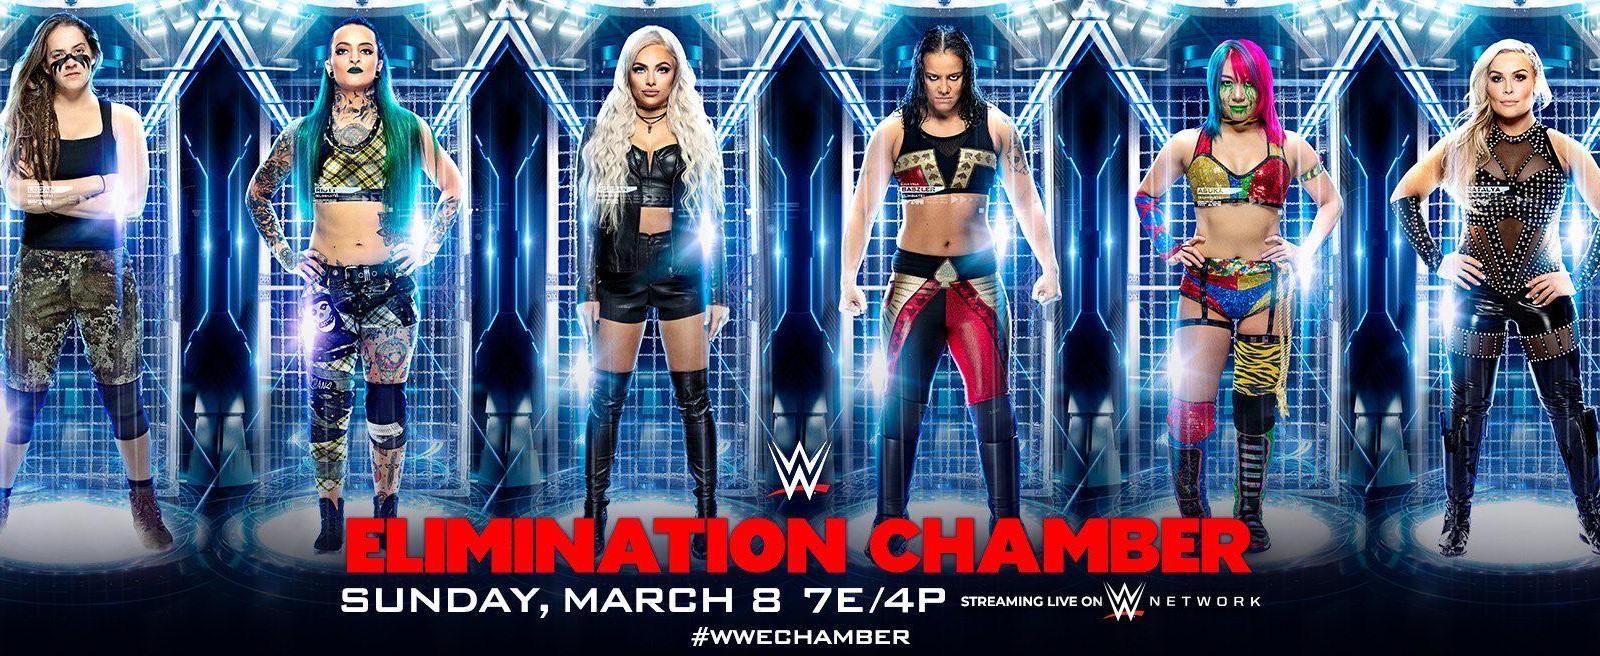 WWE Elimination Chamber 2020: Full Card, Predictions, More